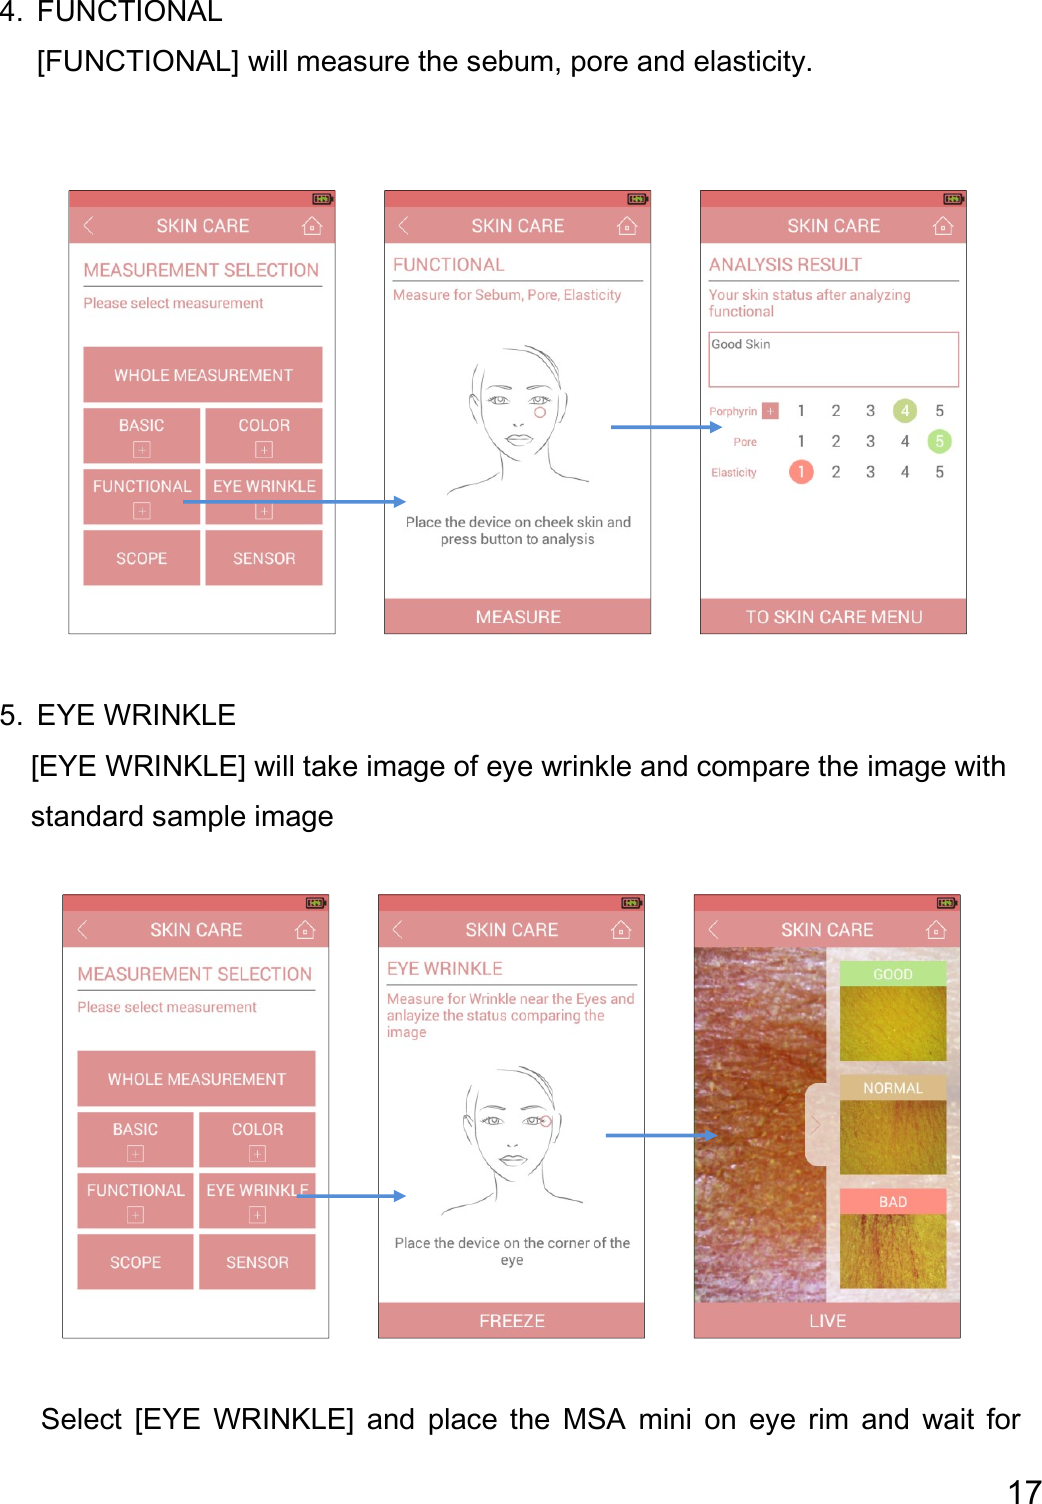  17  4. FUNCTIONAL [FUNCTIONAL] will measure the sebum, pore and elasticity.                       5. EYE WRINKLE         [EYE WRINKLE] will take image of eye wrinkle and compare the image with           standard sample image                         Select  [EYE  WRINKLE]  and  place  the  MSA  mini  on  eye  rim  and  wait  for 